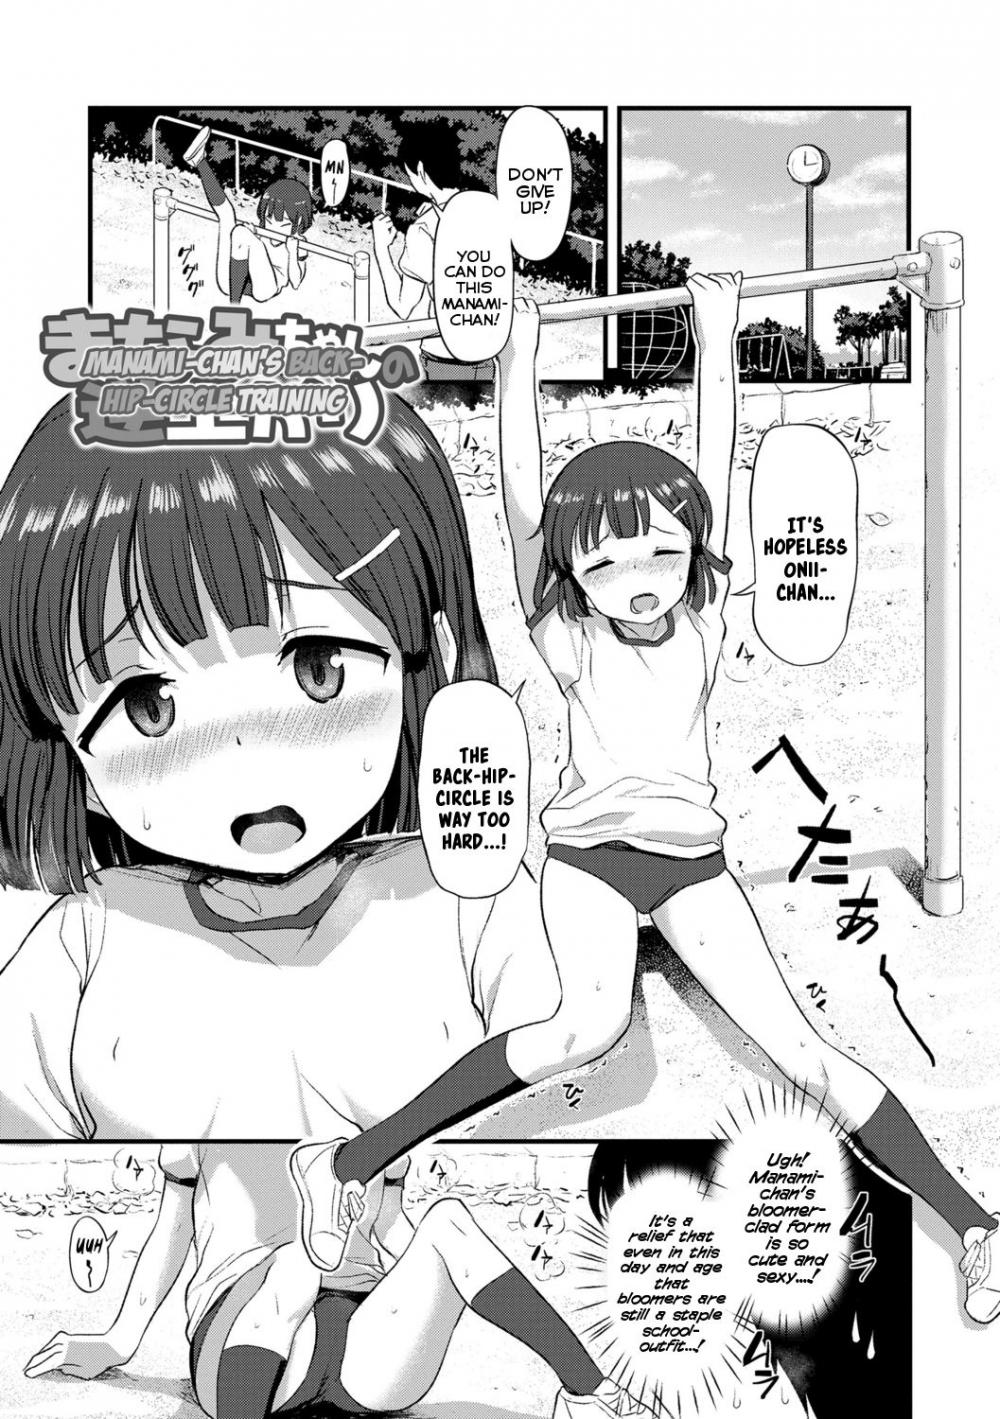 Hentai Manga Comic-What Kind of Weirdo Onii-chan Gets Excited From Seeing His Little Sister Naked?-Chapter 4-1